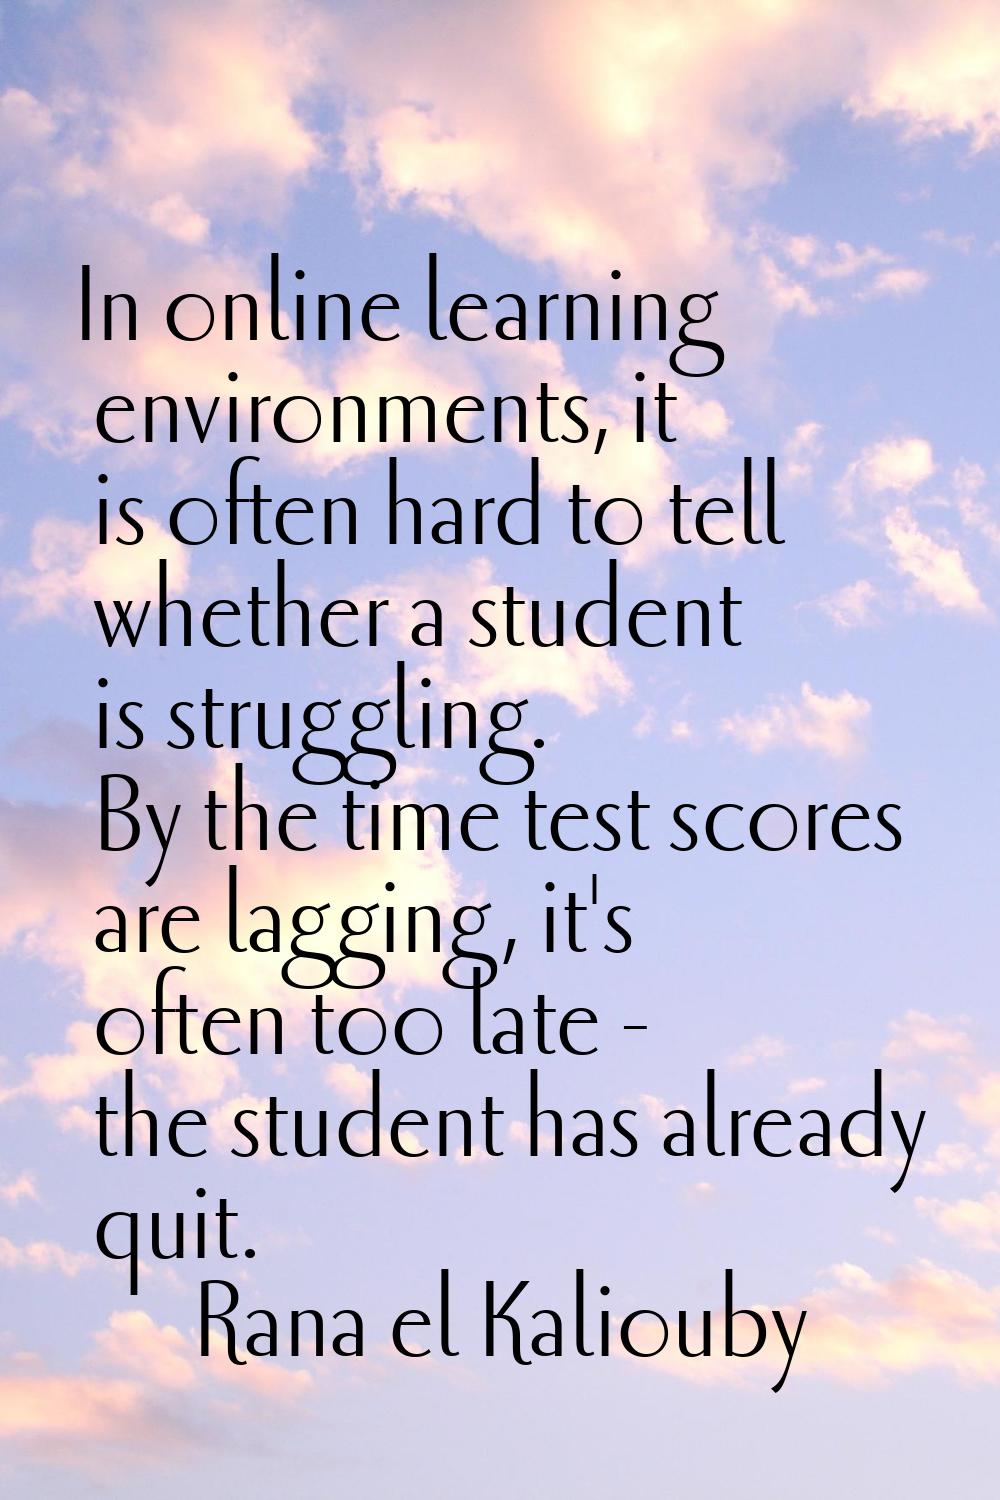 In online learning environments, it is often hard to tell whether a student is struggling. By the t